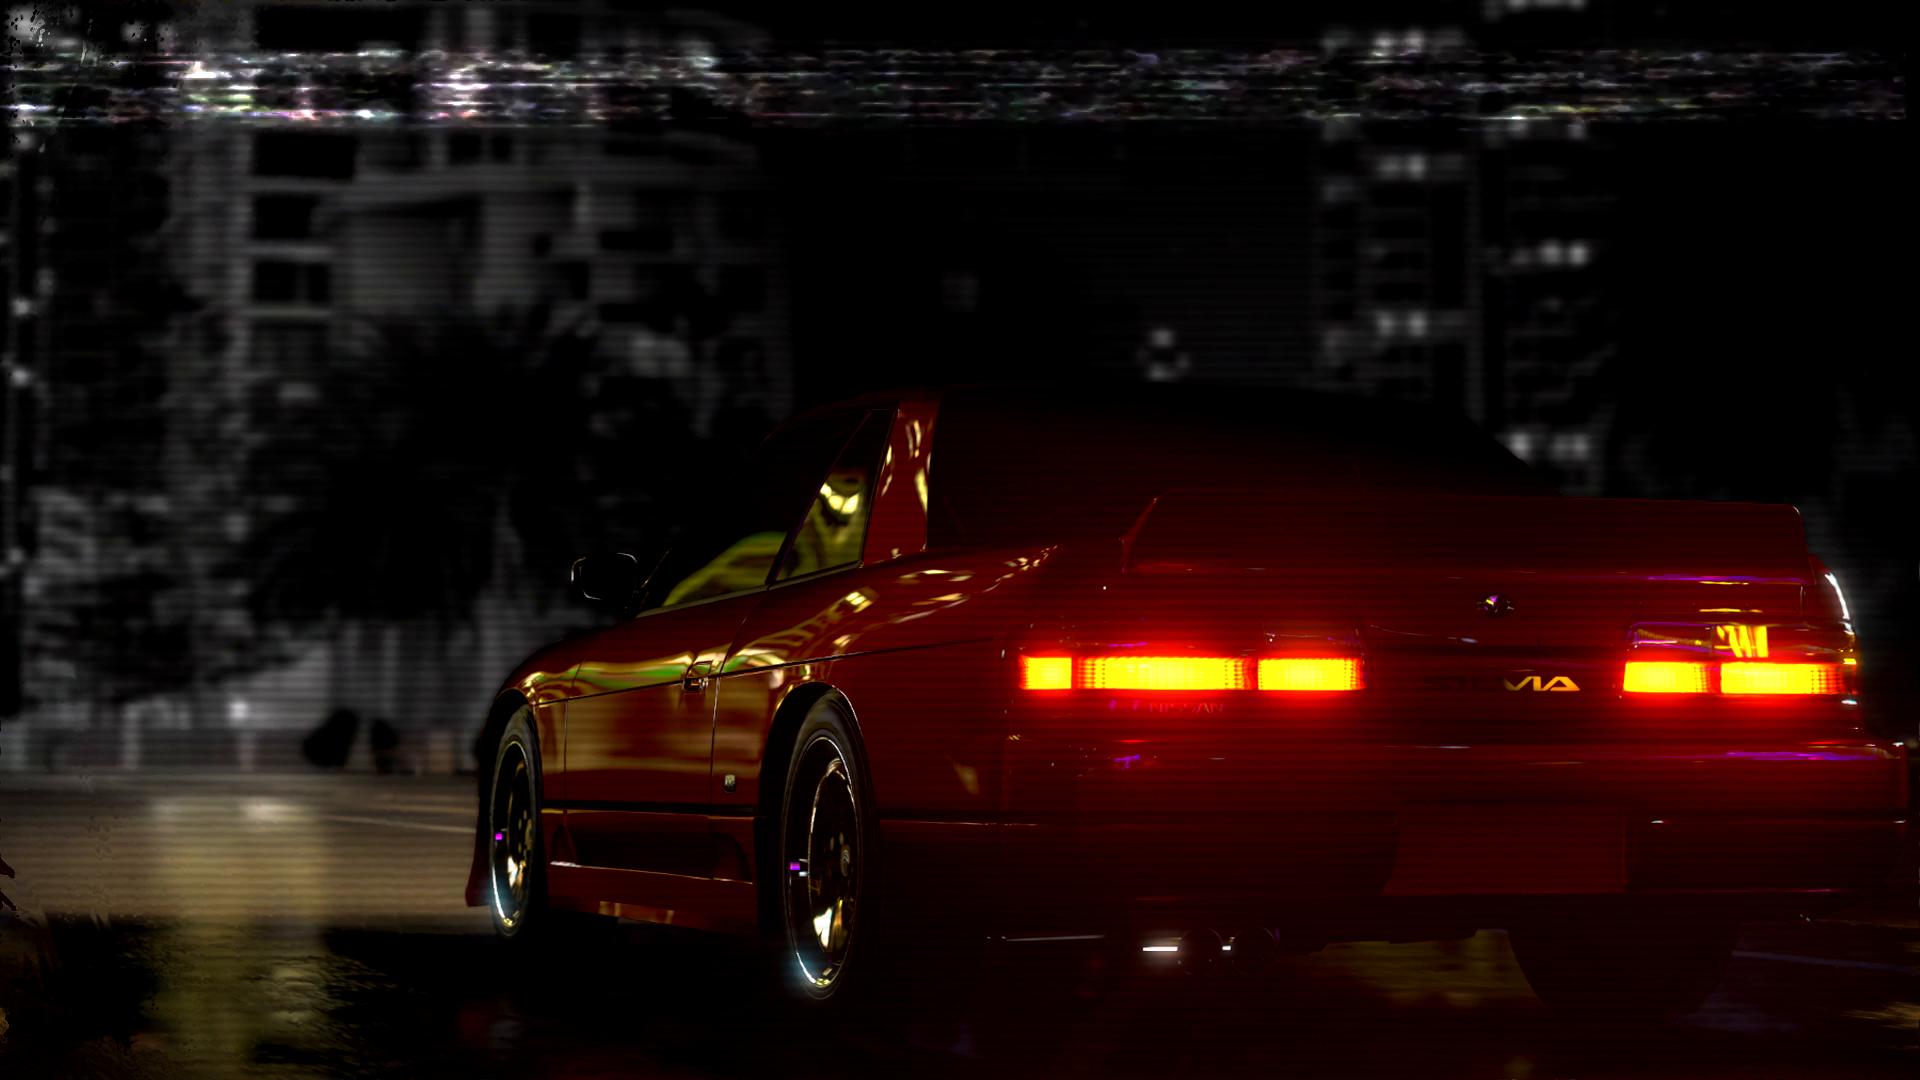 4288x2848  nissan silvia s13 wallpaper  Coolwallpapersme